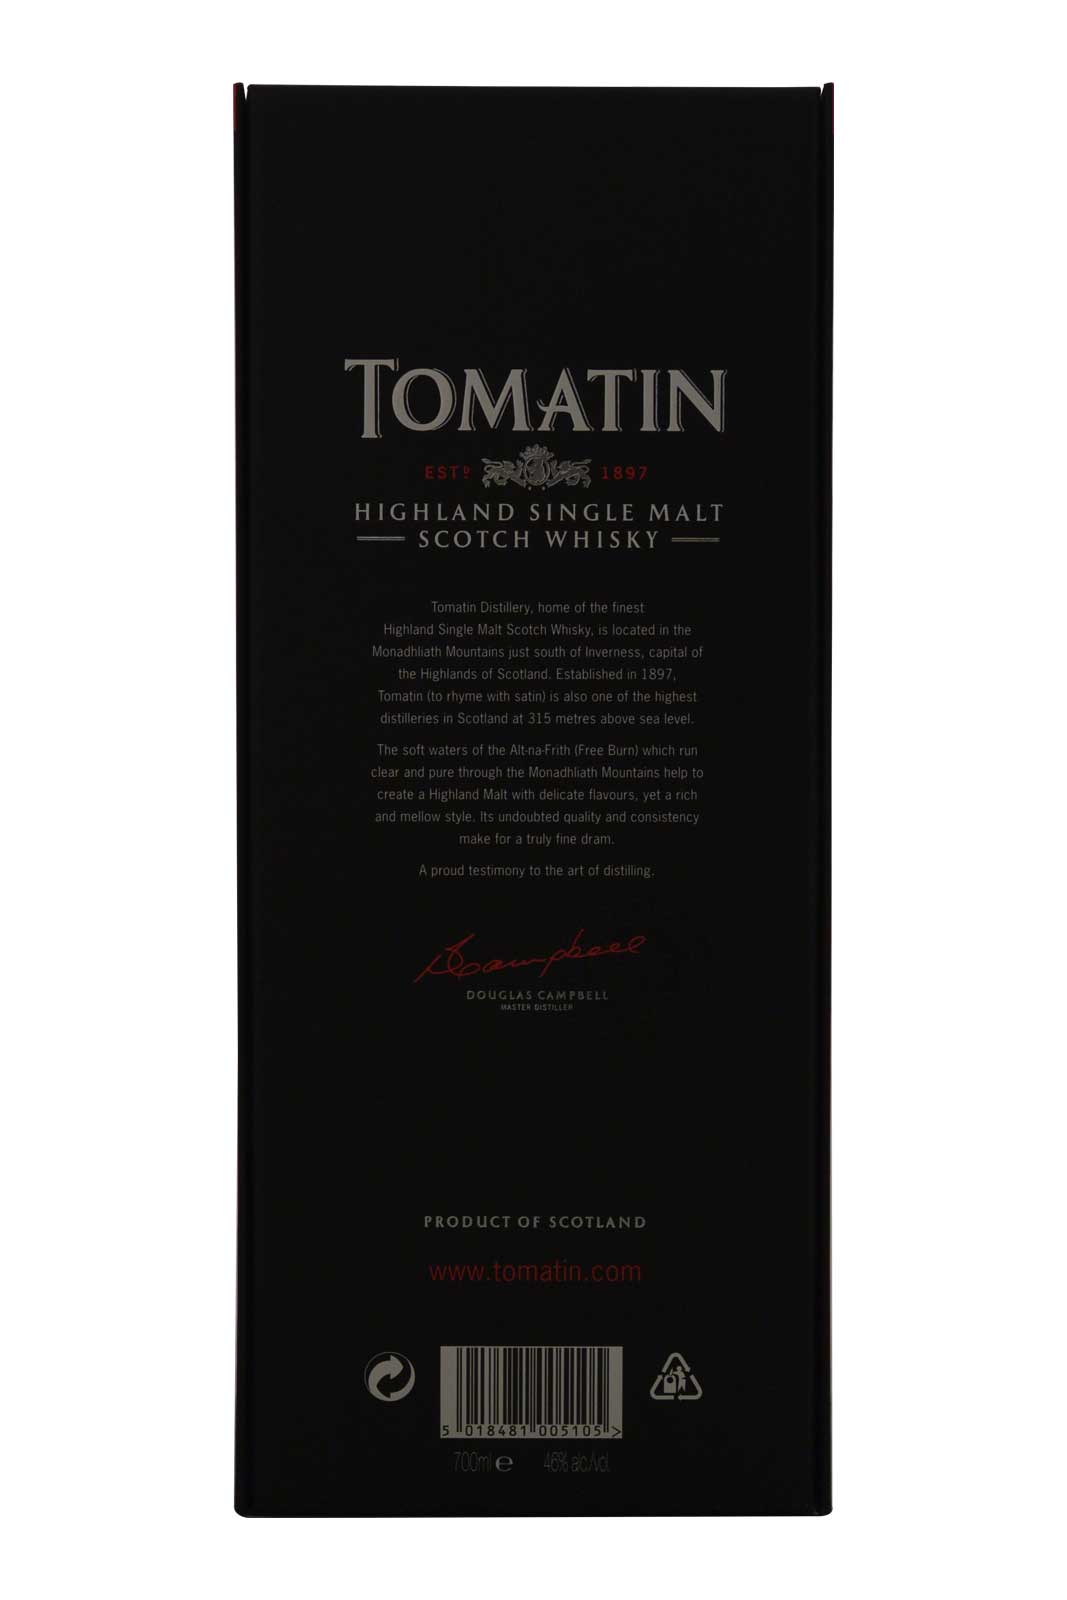 Tomatin Decades - First edition